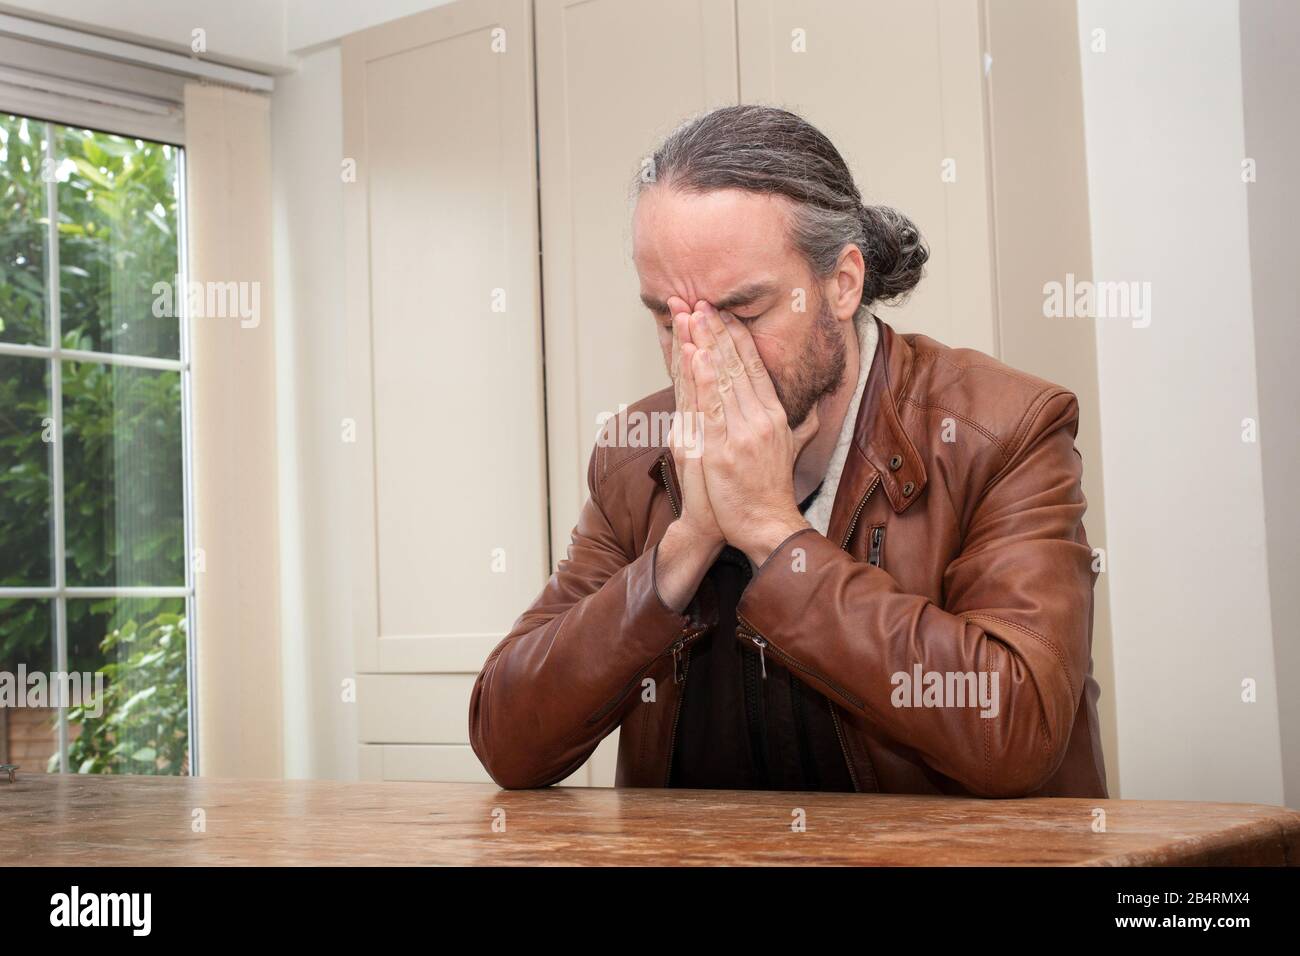 A man with a ponytail looking stress and unsure Stock Photo